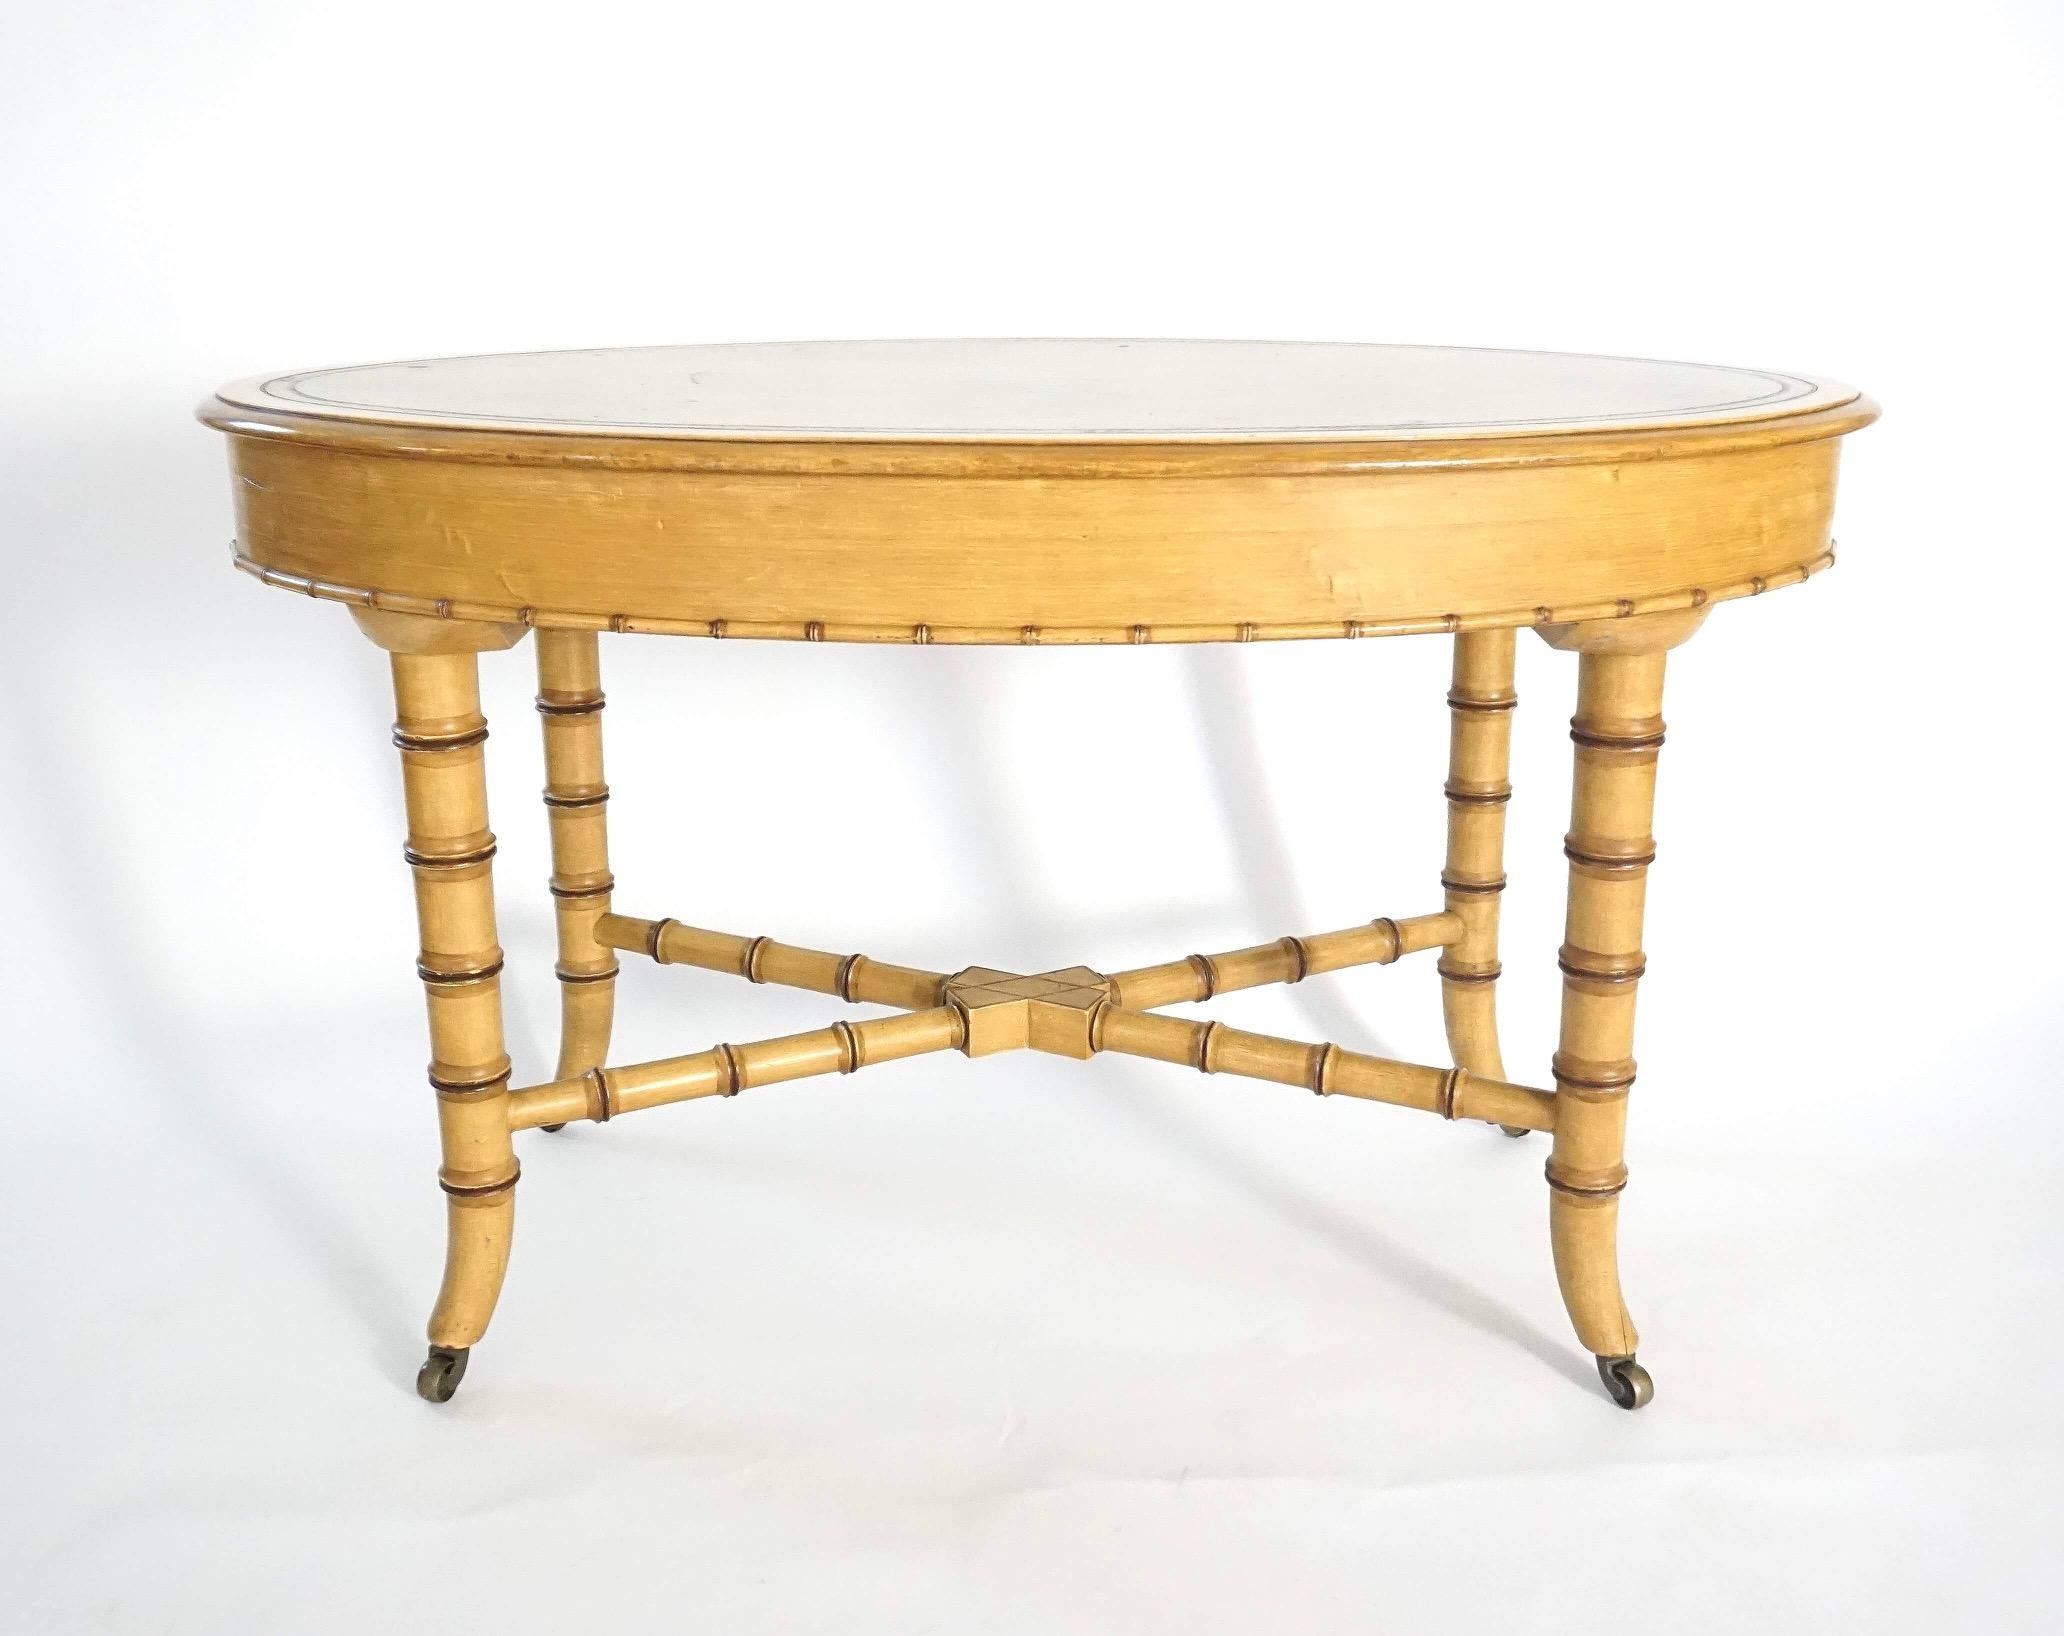 Howard & Sons London Leather Topped Faux Bamboo Writing Table, circa 1875 For Sale 1